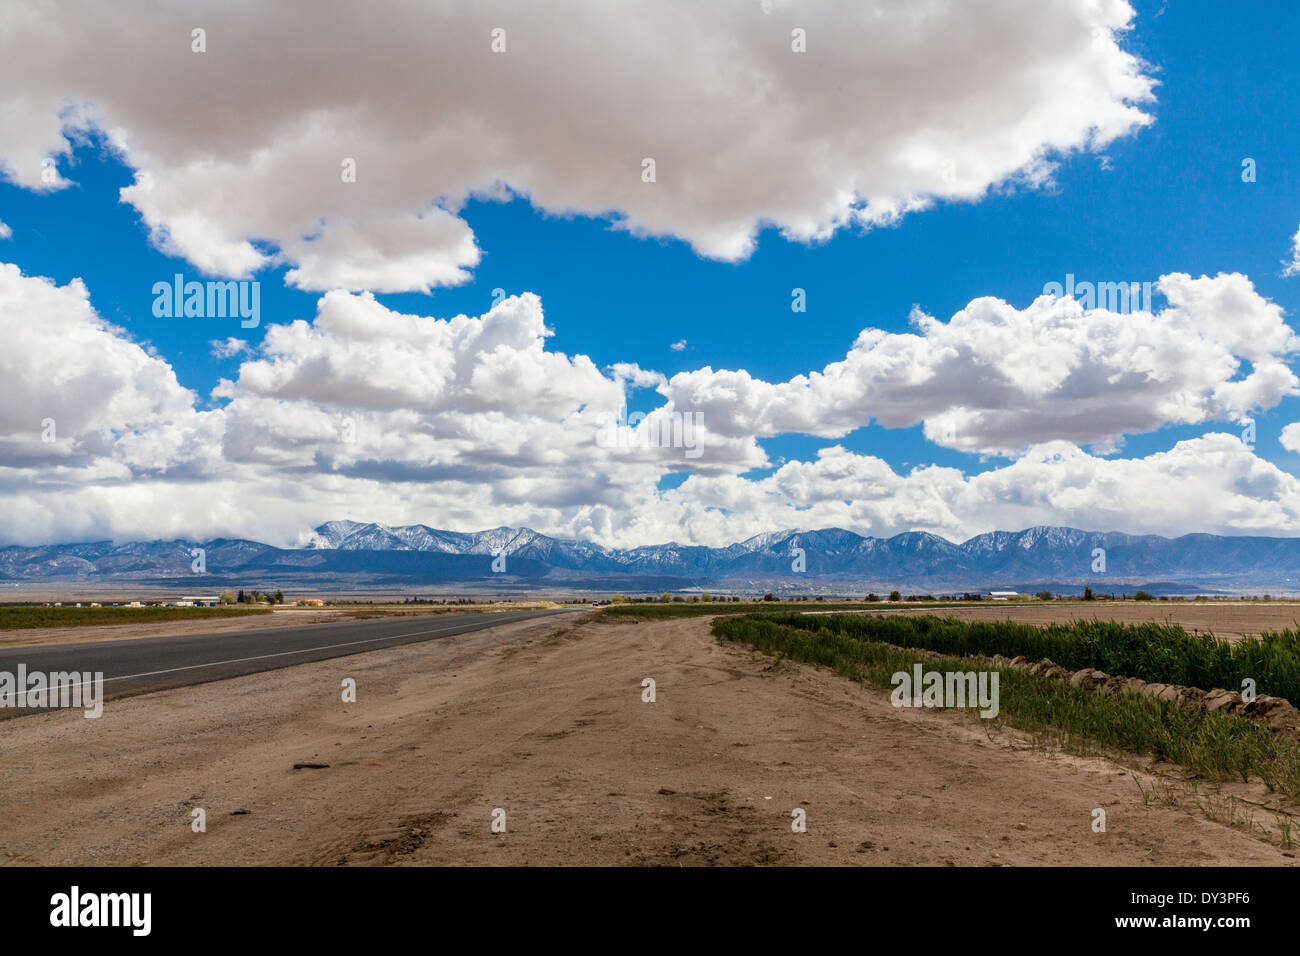 A view of the San Gabriel Mountains of California from the Antelope Valley. Stock Photo